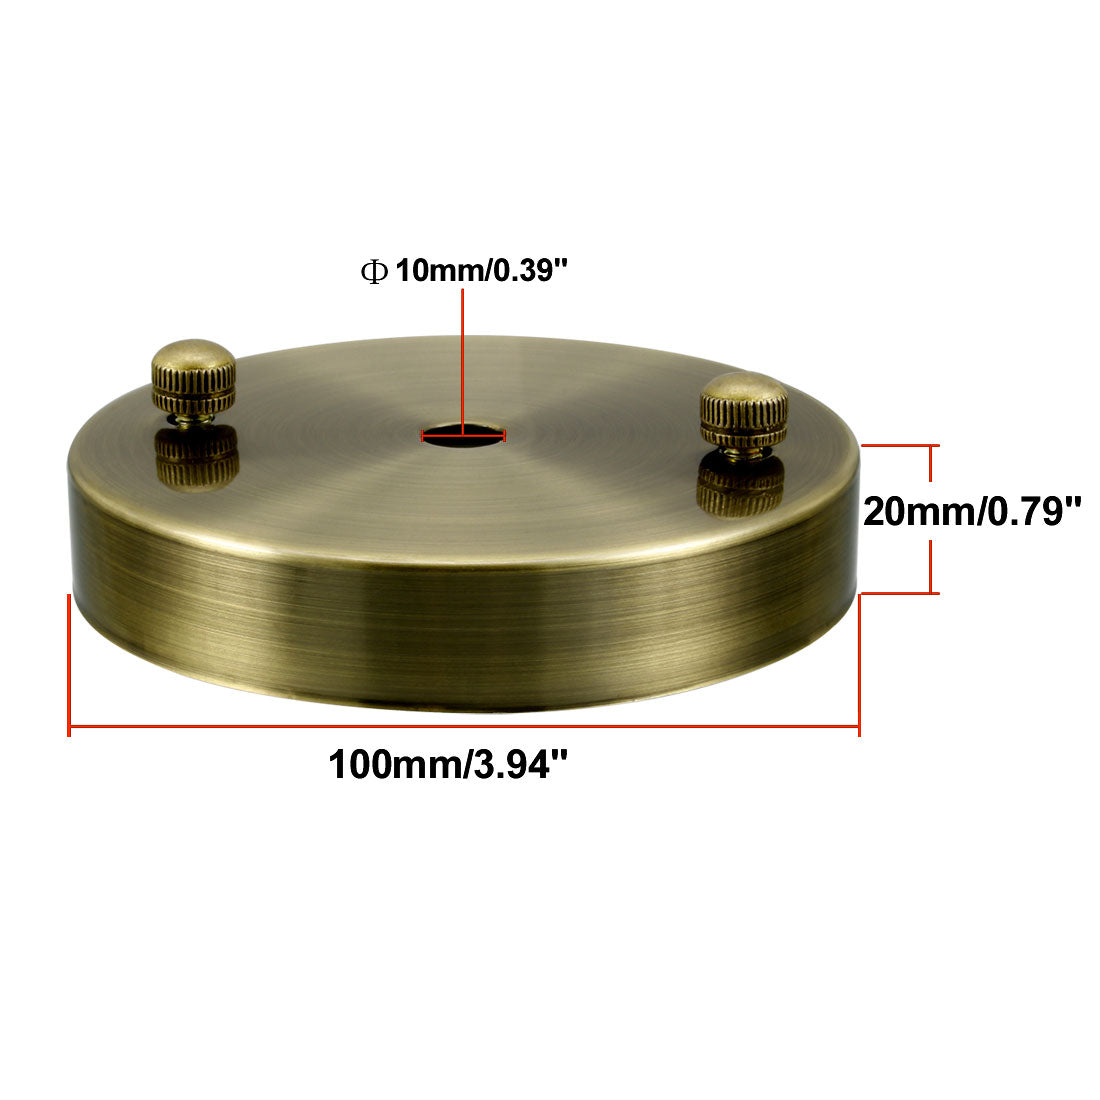 uxcell Uxcell Retro Ceiling Light Plate Pointed Base Chassis Disc Pendant Accessories 100mmx20mm Bronze w Screw 5pcs